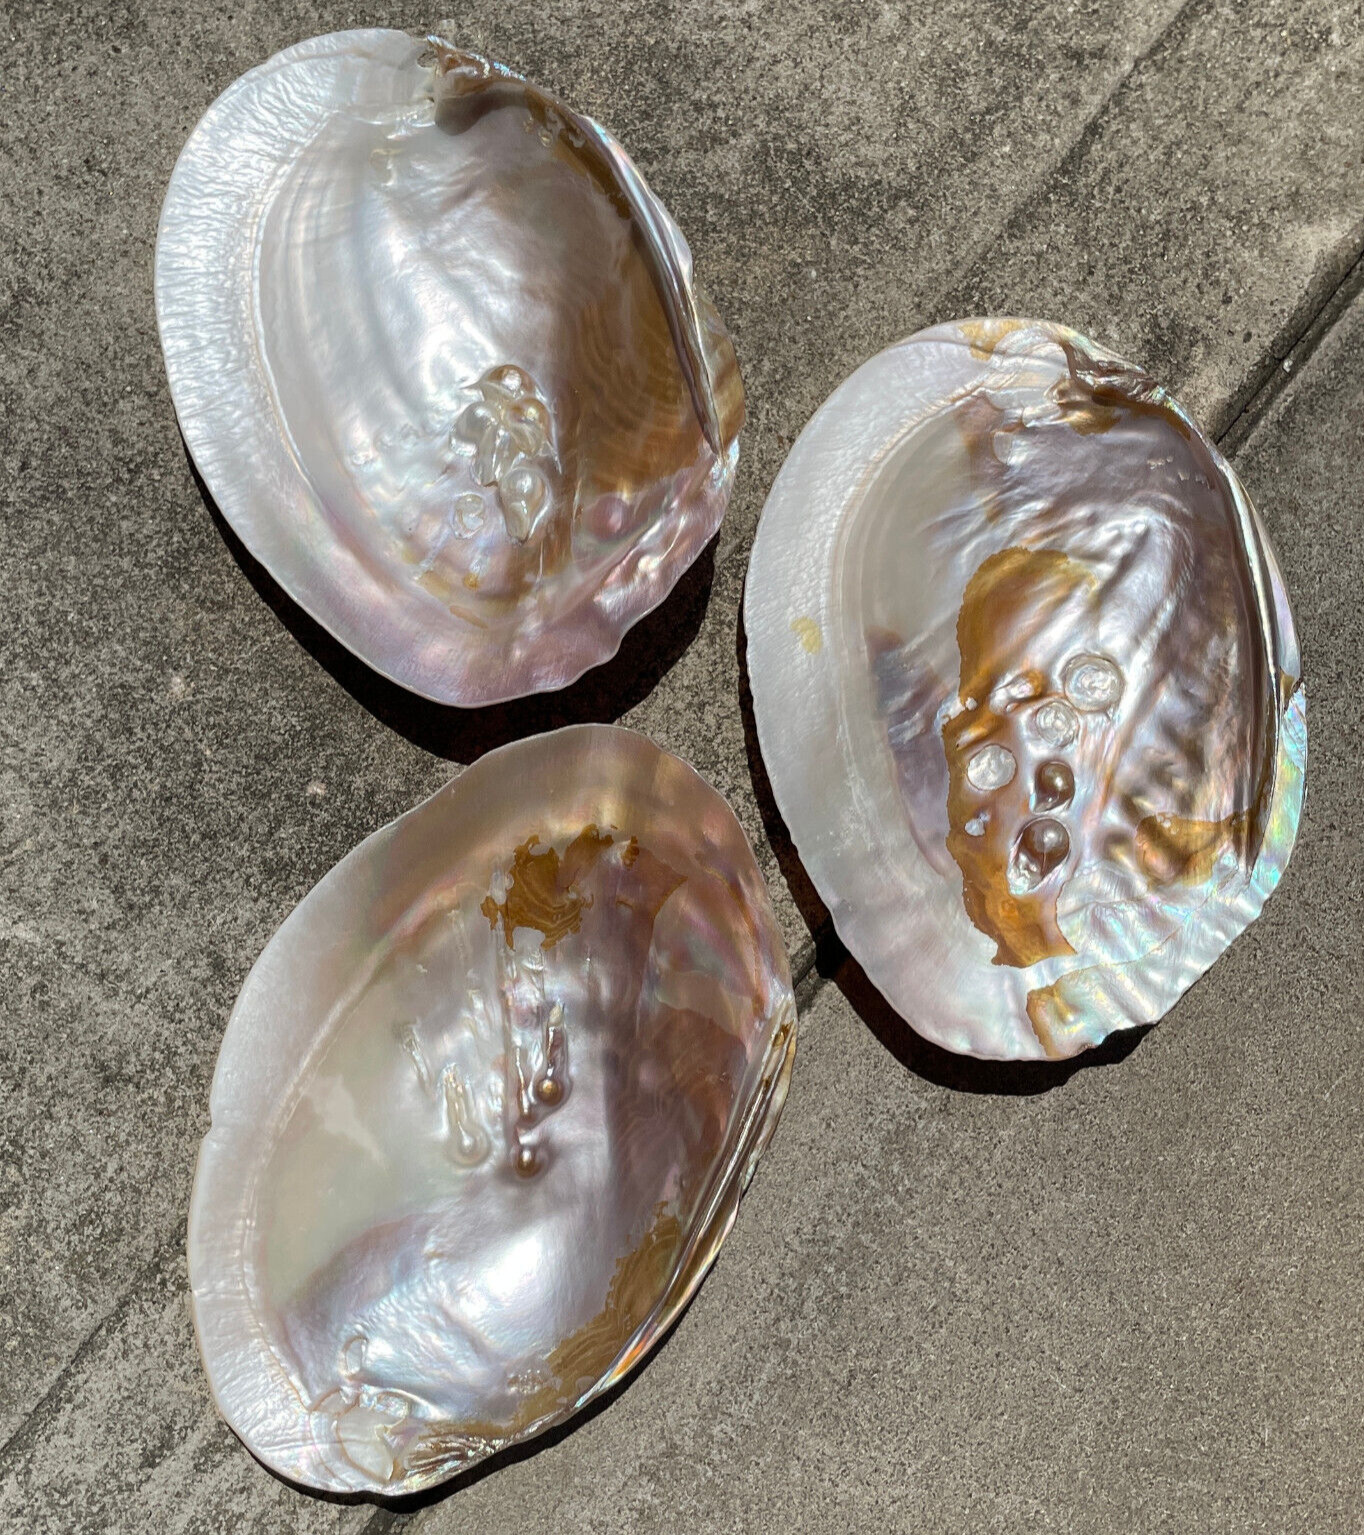 USA SALE SEE VIDEO 298g LOT 3 LARGE IRIDESCENT ABALONE BLISTER SHELLS